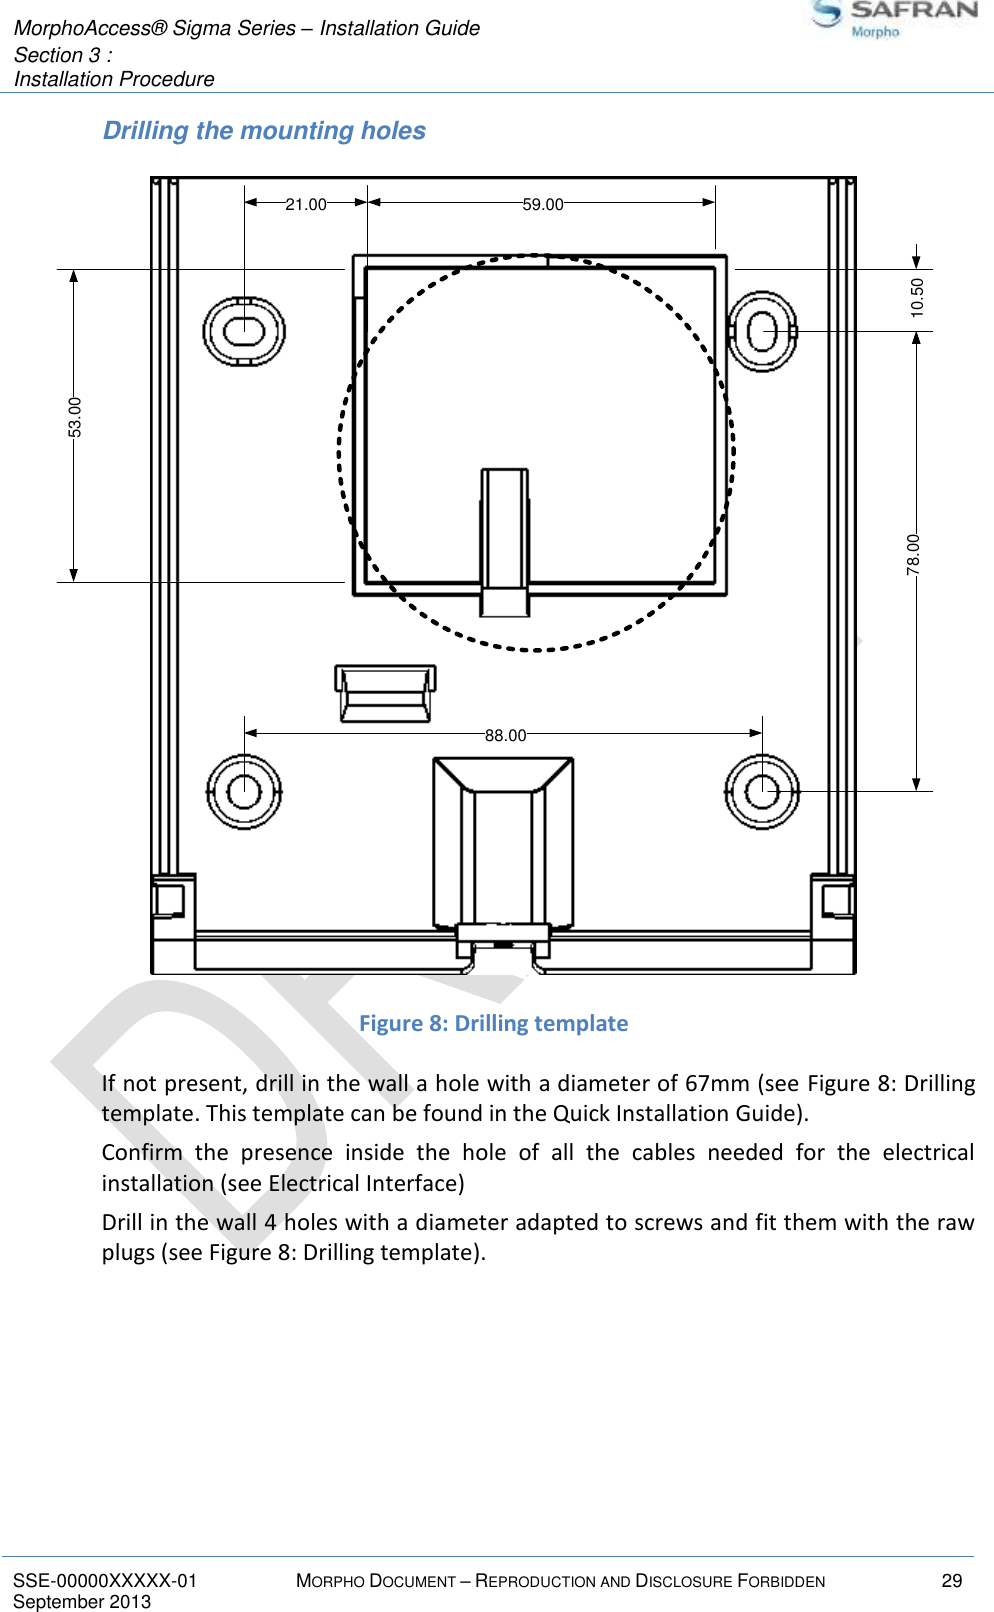  MorphoAccess® Sigma Series – Installation Guide  Section 3 :  Installation Procedure   SSE-00000XXXXX-01 MORPHO DOCUMENT – REPRODUCTION AND DISCLOSURE FORBIDDEN 29 September 2013    Drilling the mounting holes  Figure 8: Drilling template If not present, drill in the wall a hole with a diameter of 67mm (see Figure 8: Drilling template. This template can be found in the Quick Installation Guide). Confirm  the  presence  inside  the  hole  of  all  the  cables  needed  for  the  electrical installation (see Electrical Interface) Drill in the wall 4 holes with a diameter adapted to screws and fit them with the raw plugs (see Figure 8: Drilling template).   88.0078.0021.00 59.0010.5053.00